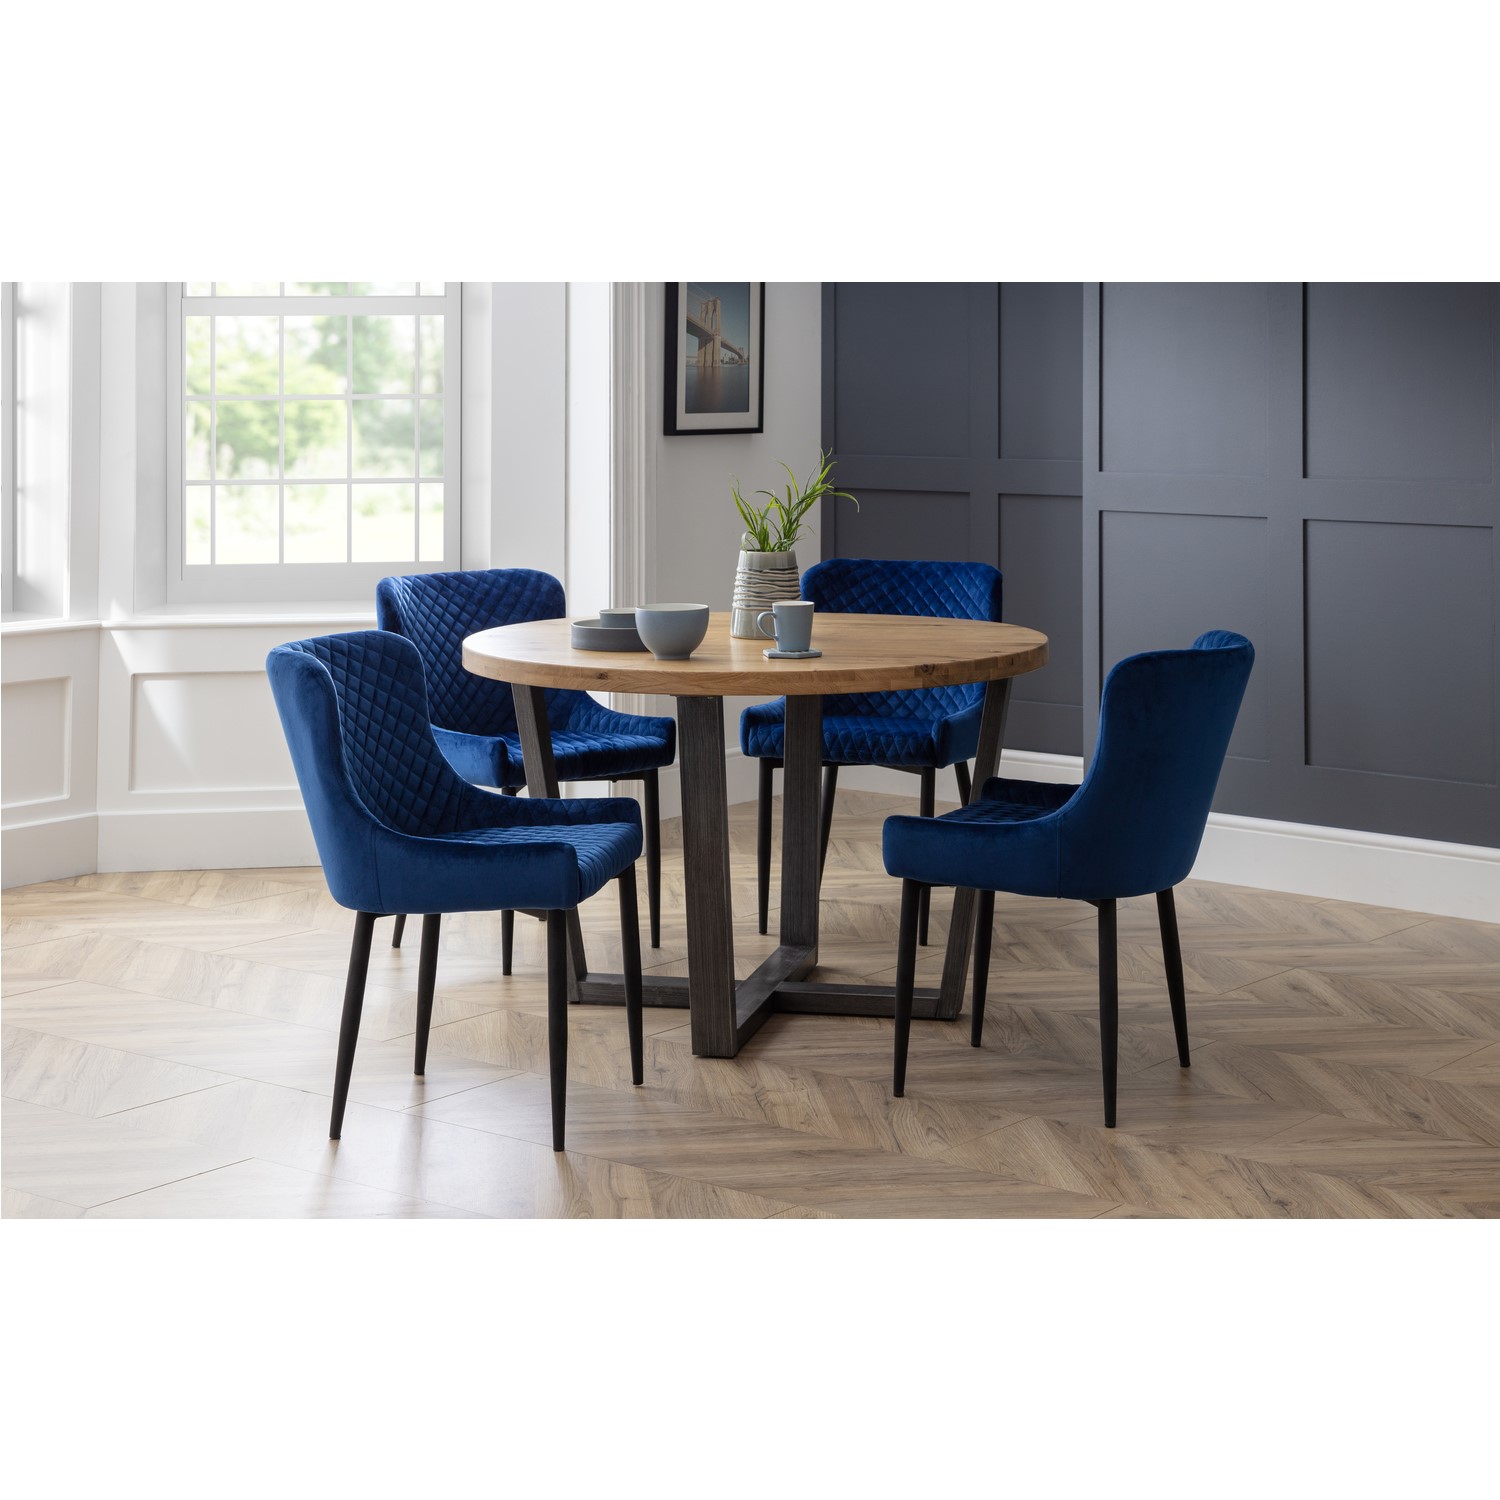 Blue Ihouse Set of 2 Dining Chair Wood Legs Coffee Chairs Velvet Cushion Seat and Back for Dining and Living Room Chairs